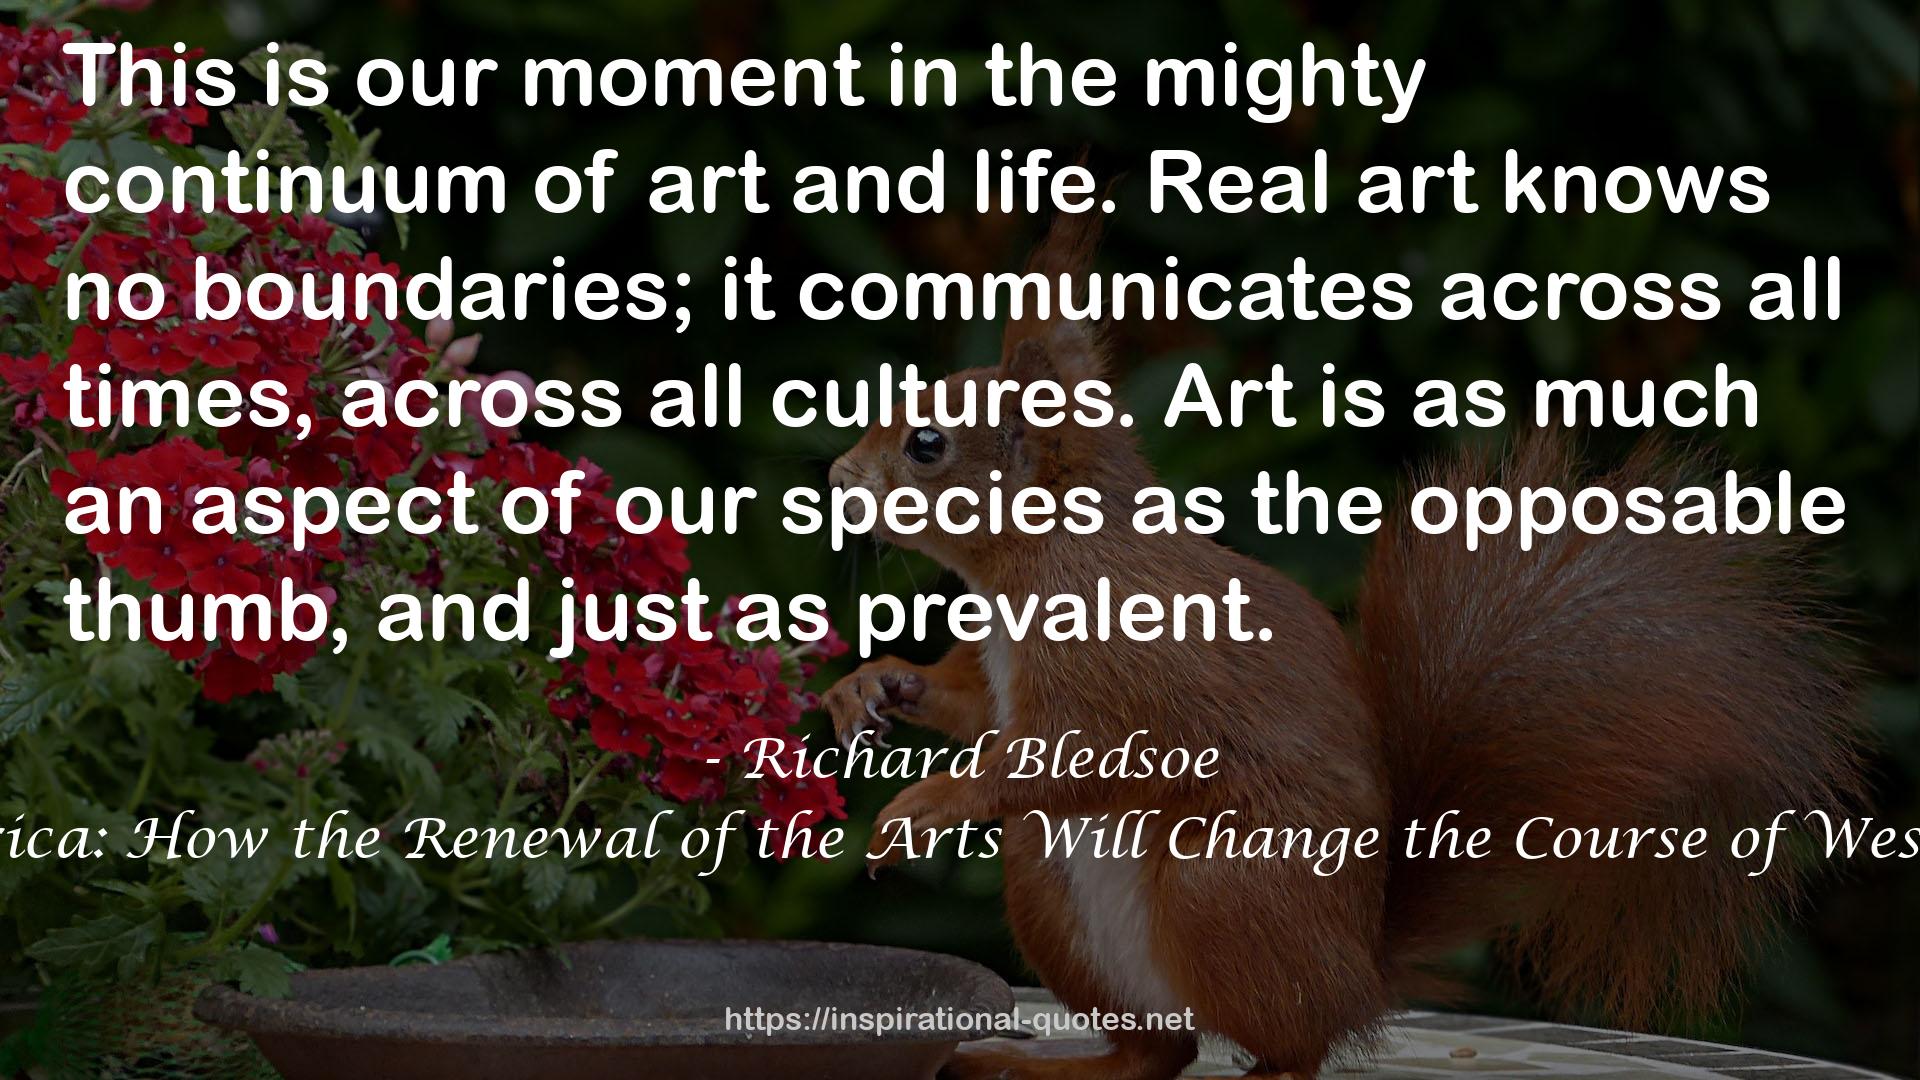 Remodern America: How the Renewal of the Arts Will Change the Course of Western Civilization QUOTES